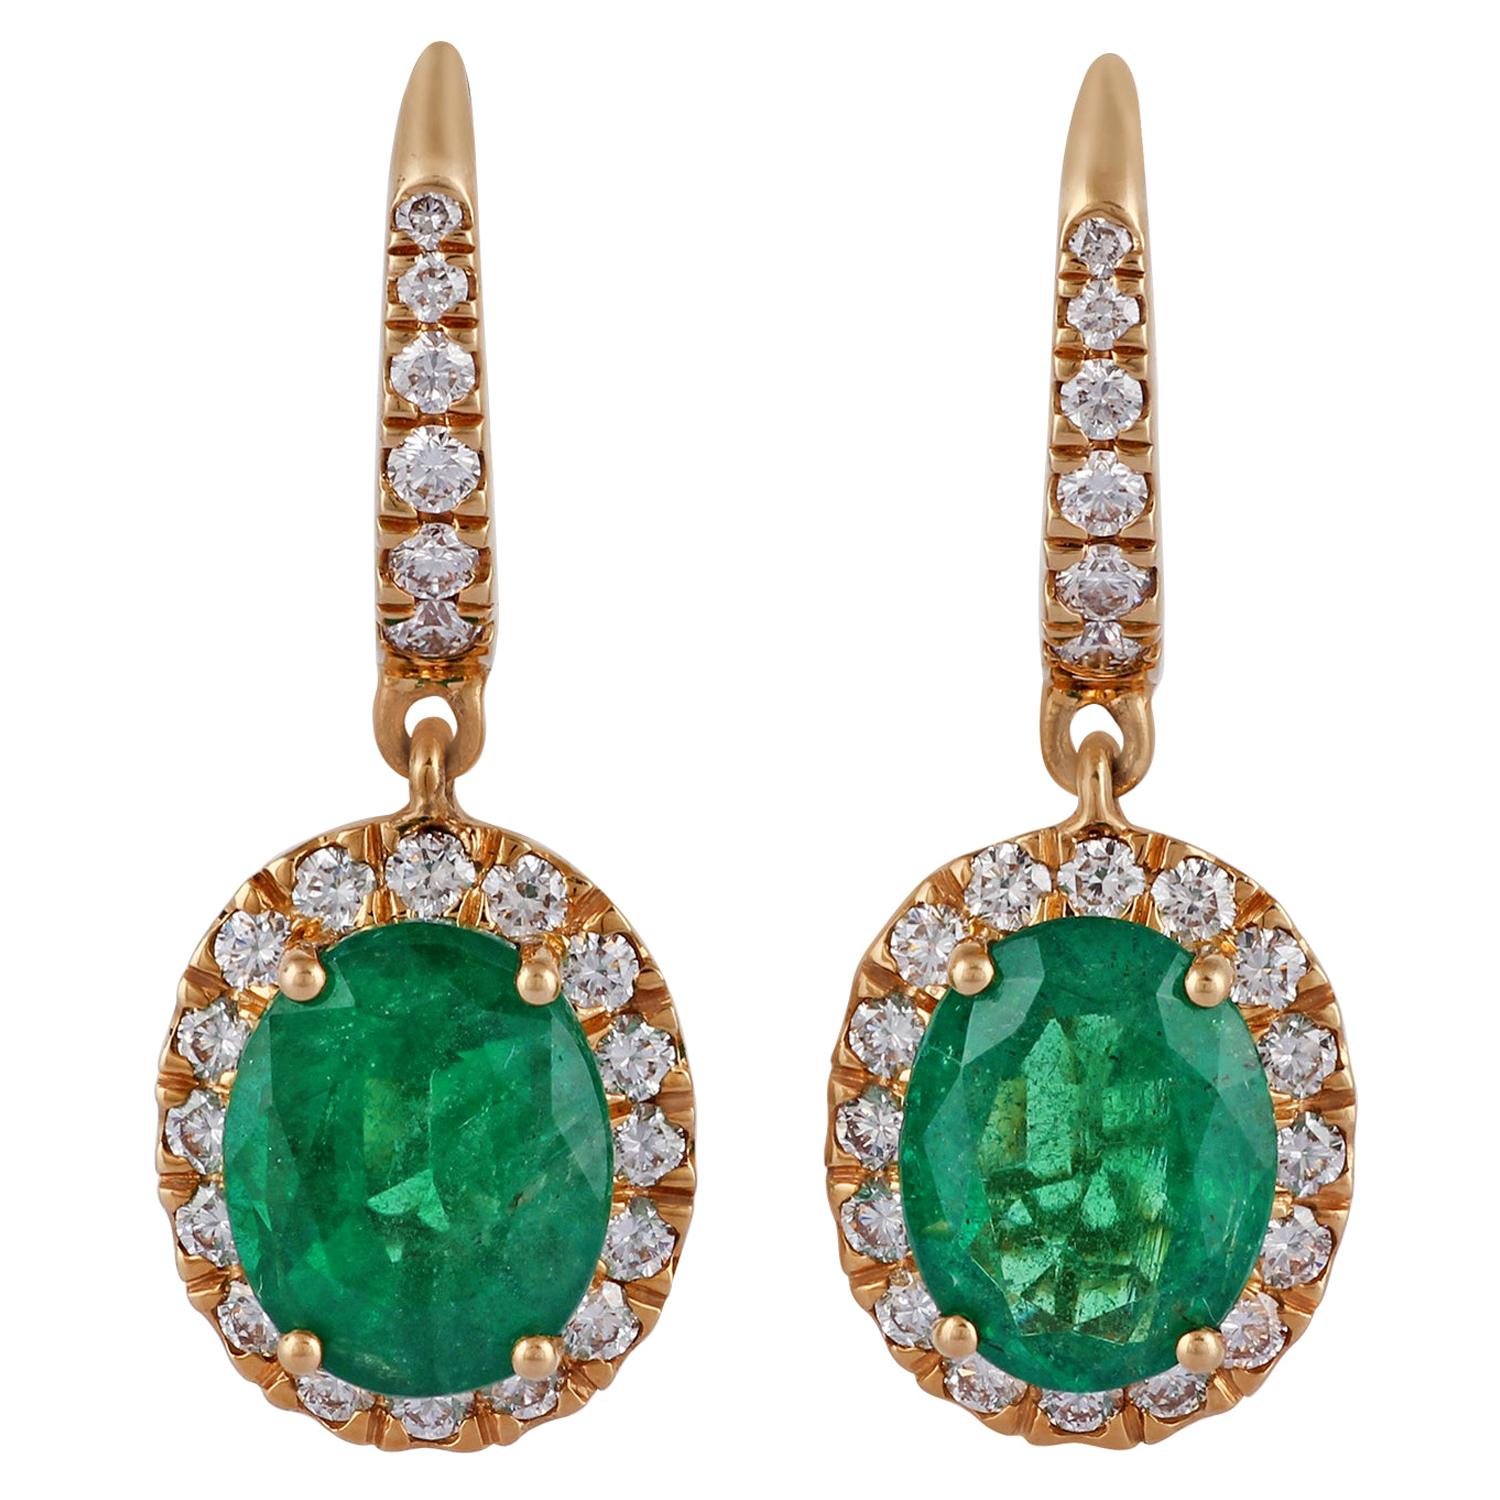  5.15 CaratZambian Emerald and Diamond Earring Studded in 18 Karat Yellow Gold For Sale